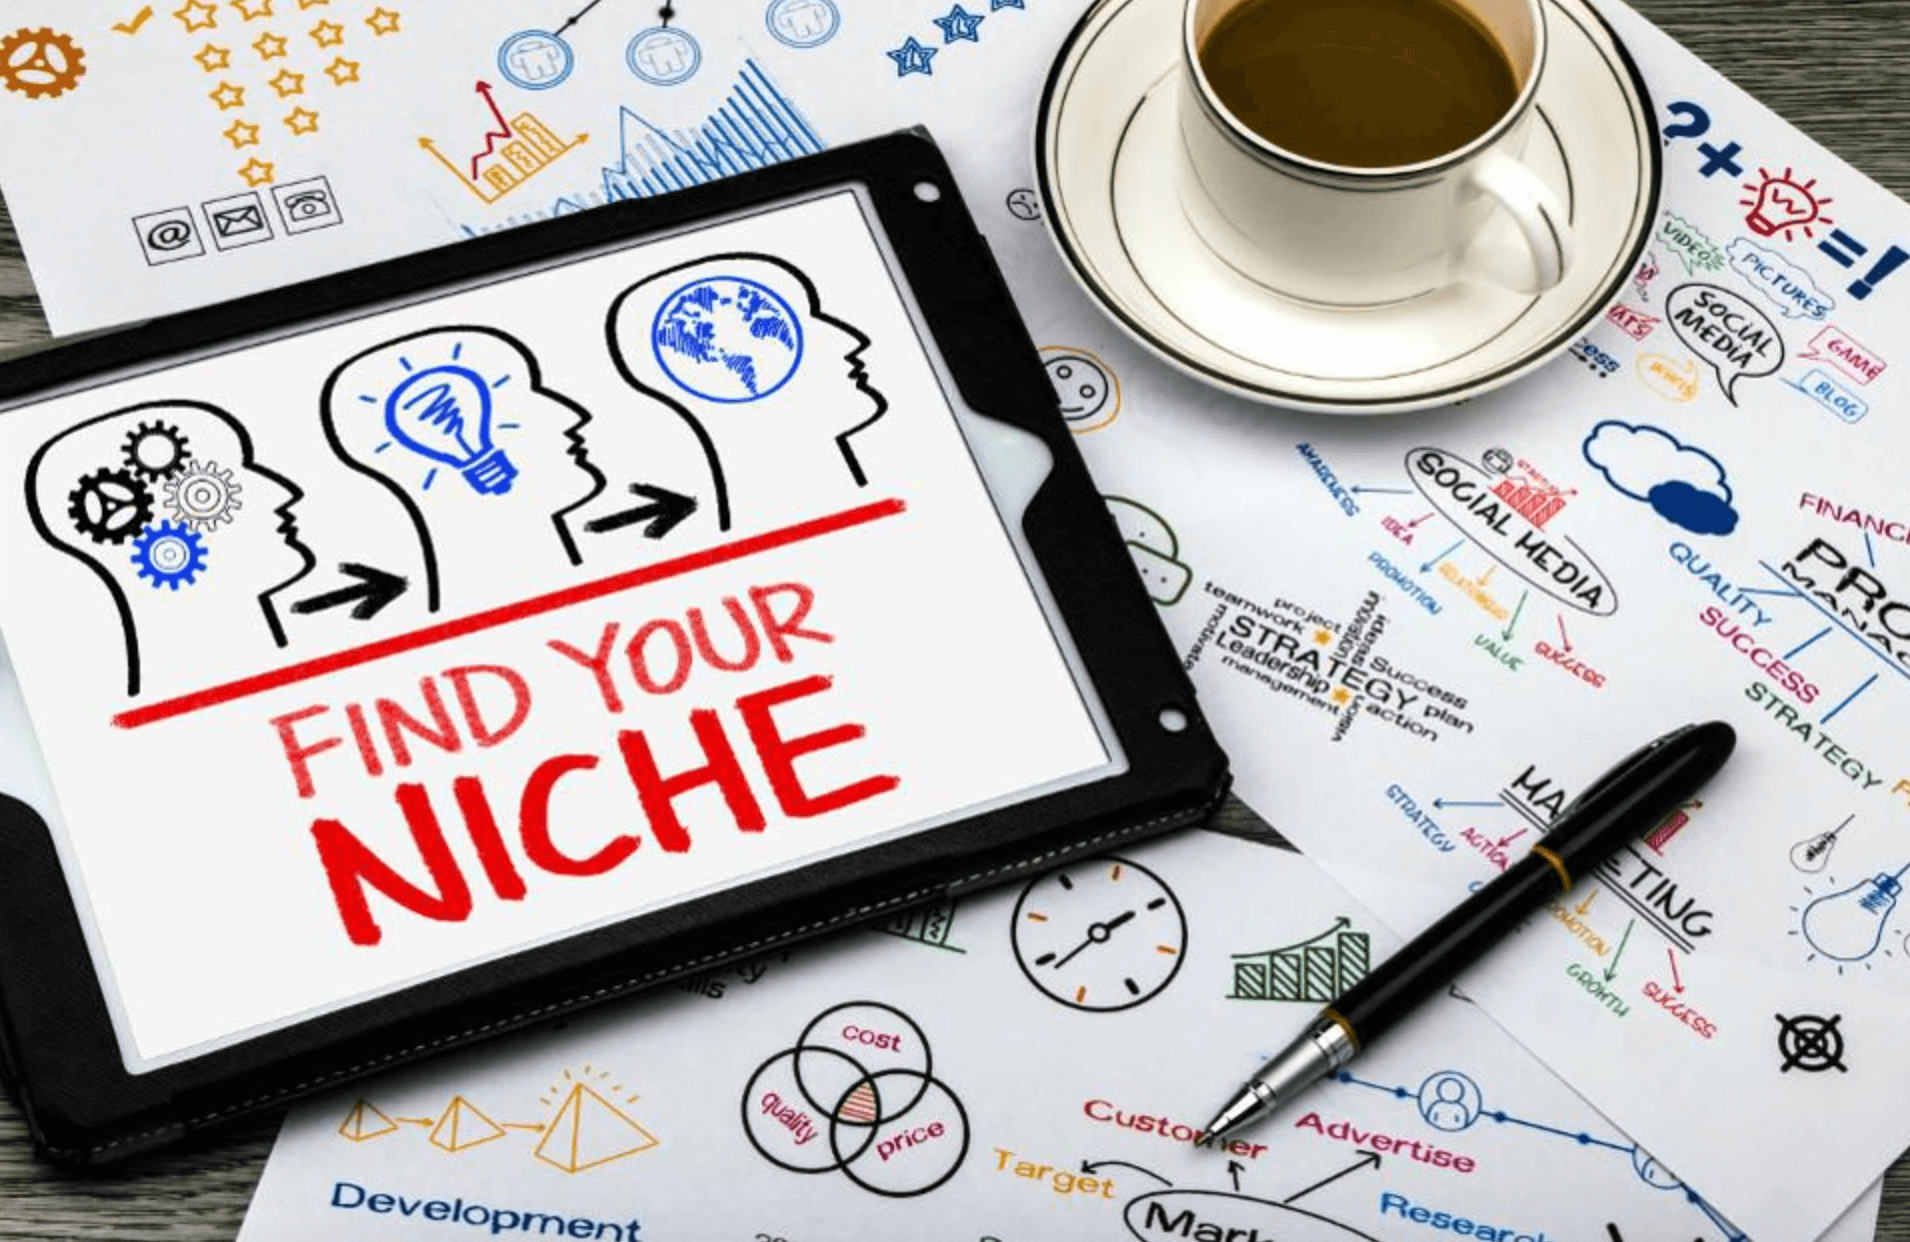 Niche finder software with low competition keywords